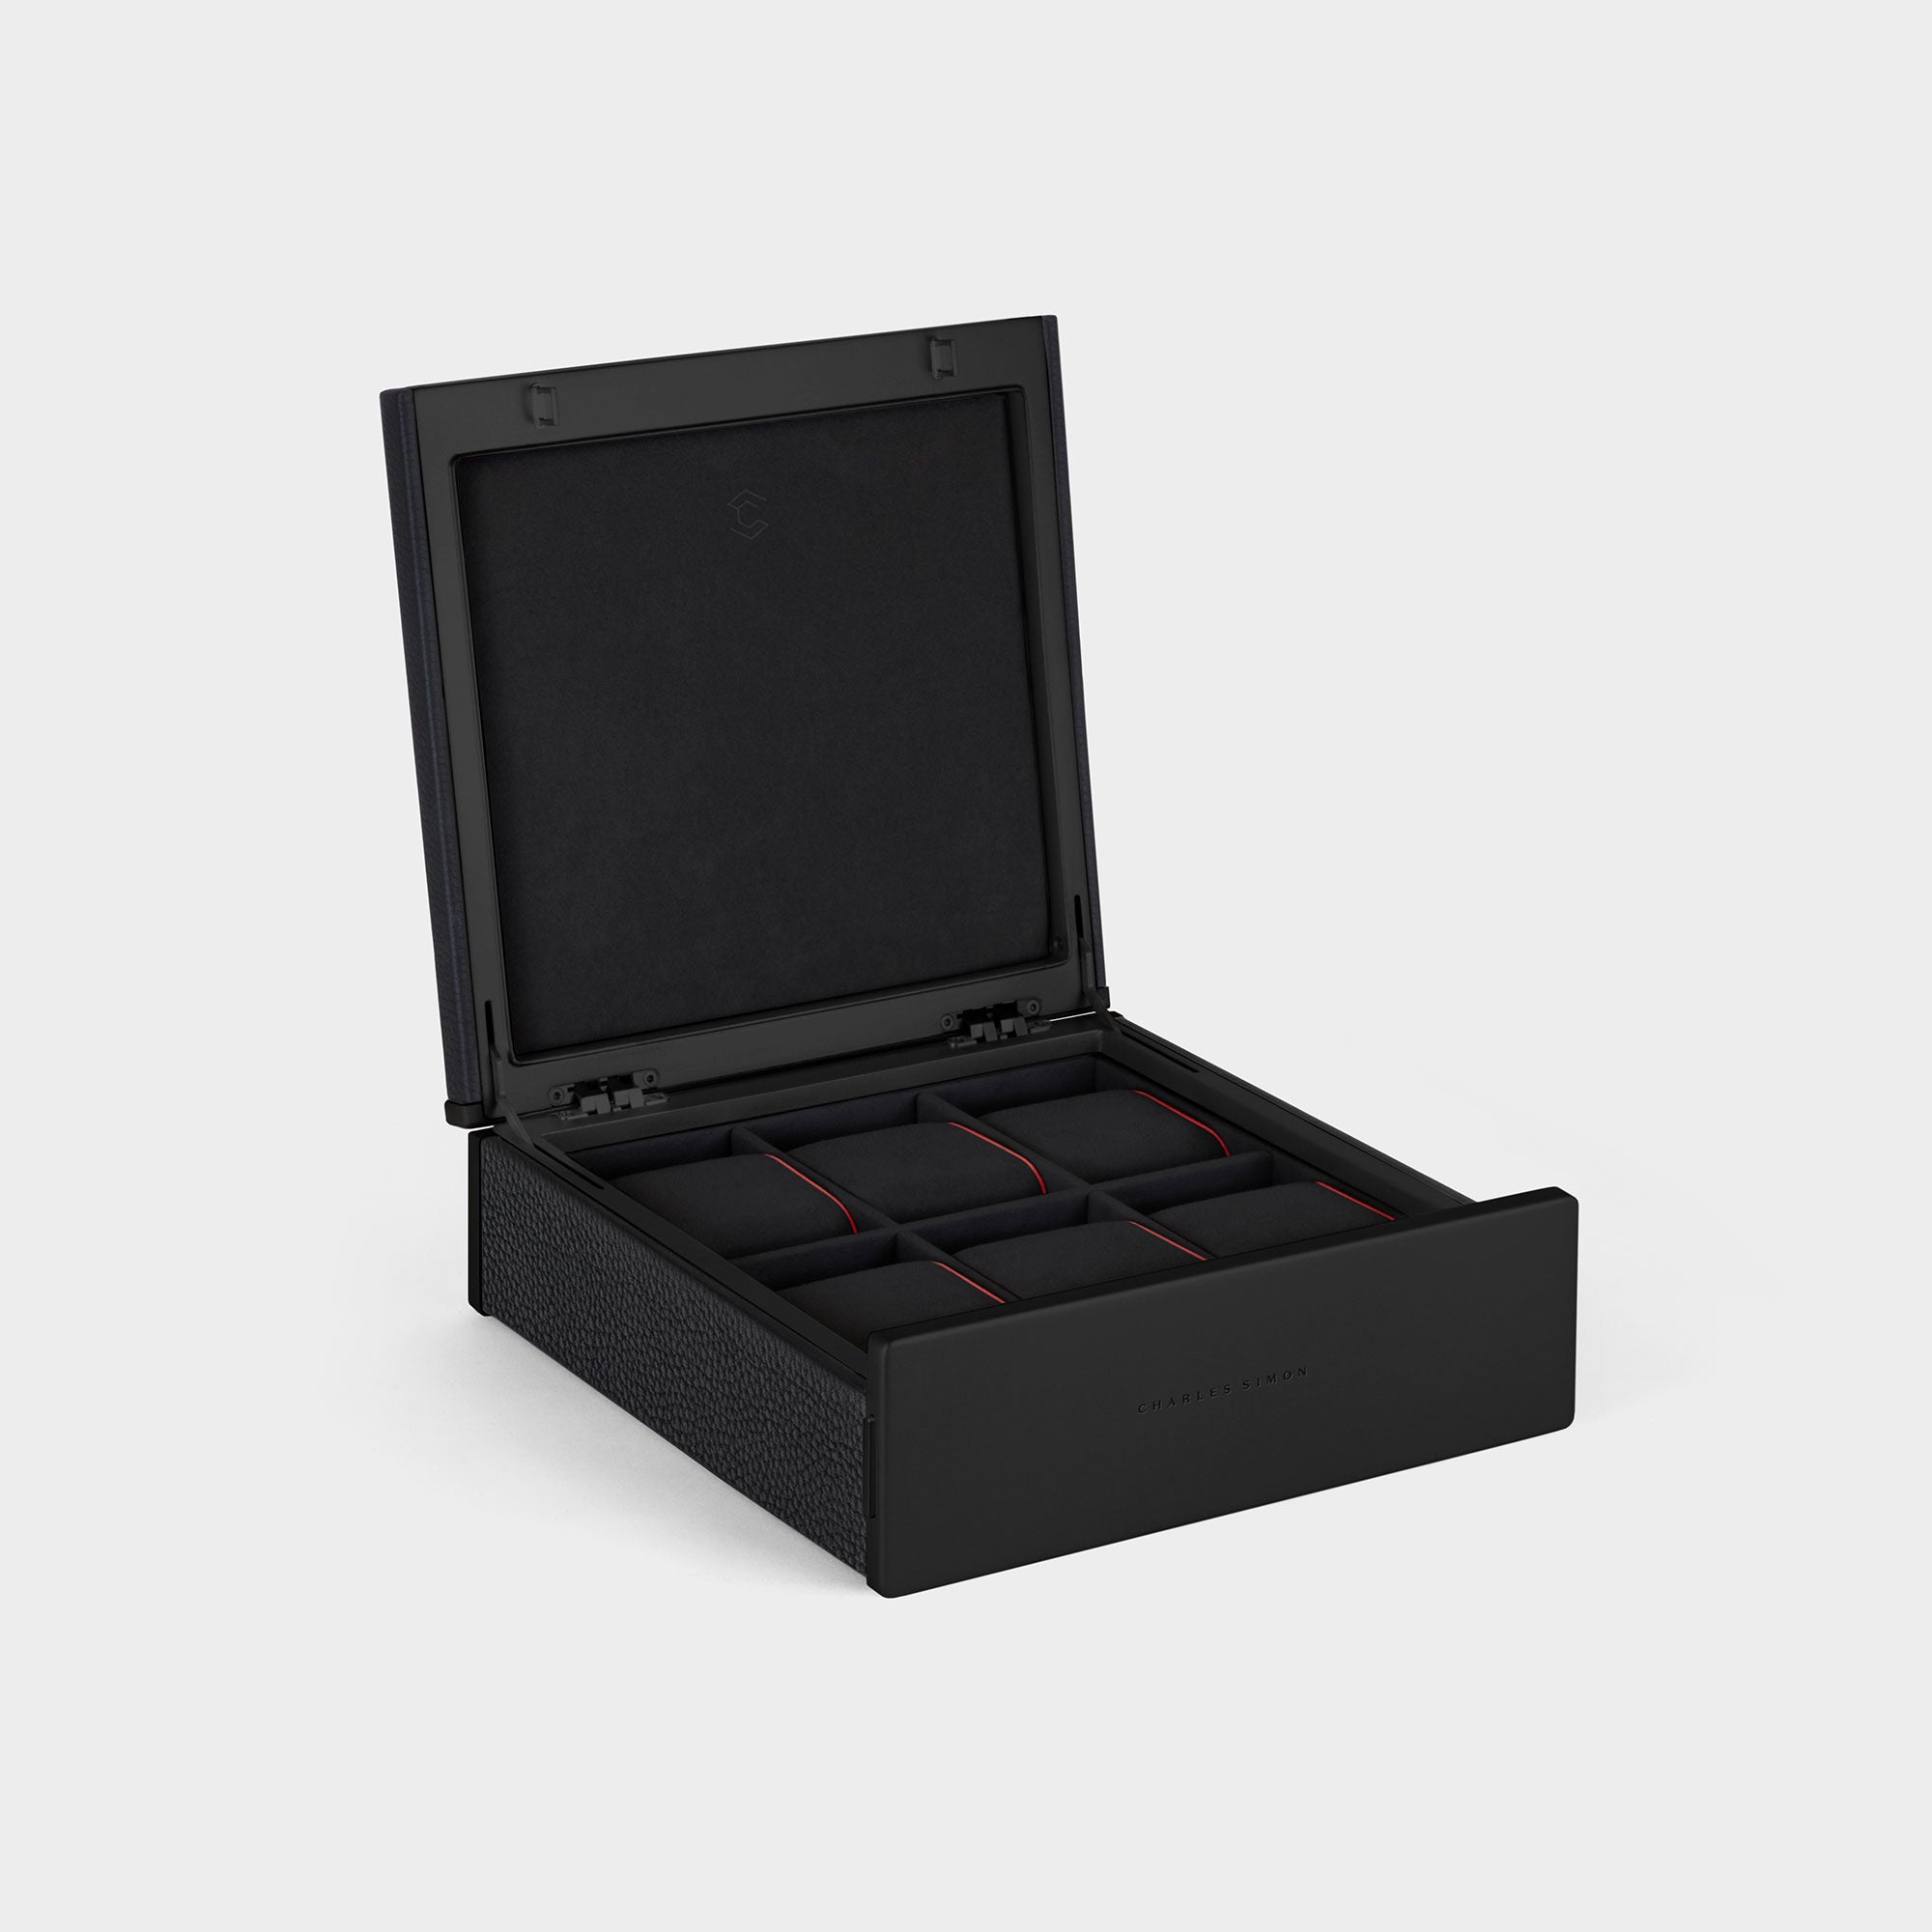 Handmade watch box for 6 watches in black leather, black carbon fiber and anodized aluminum casing and Notte Alcantara interior with Notte watch cushions with red leather sides